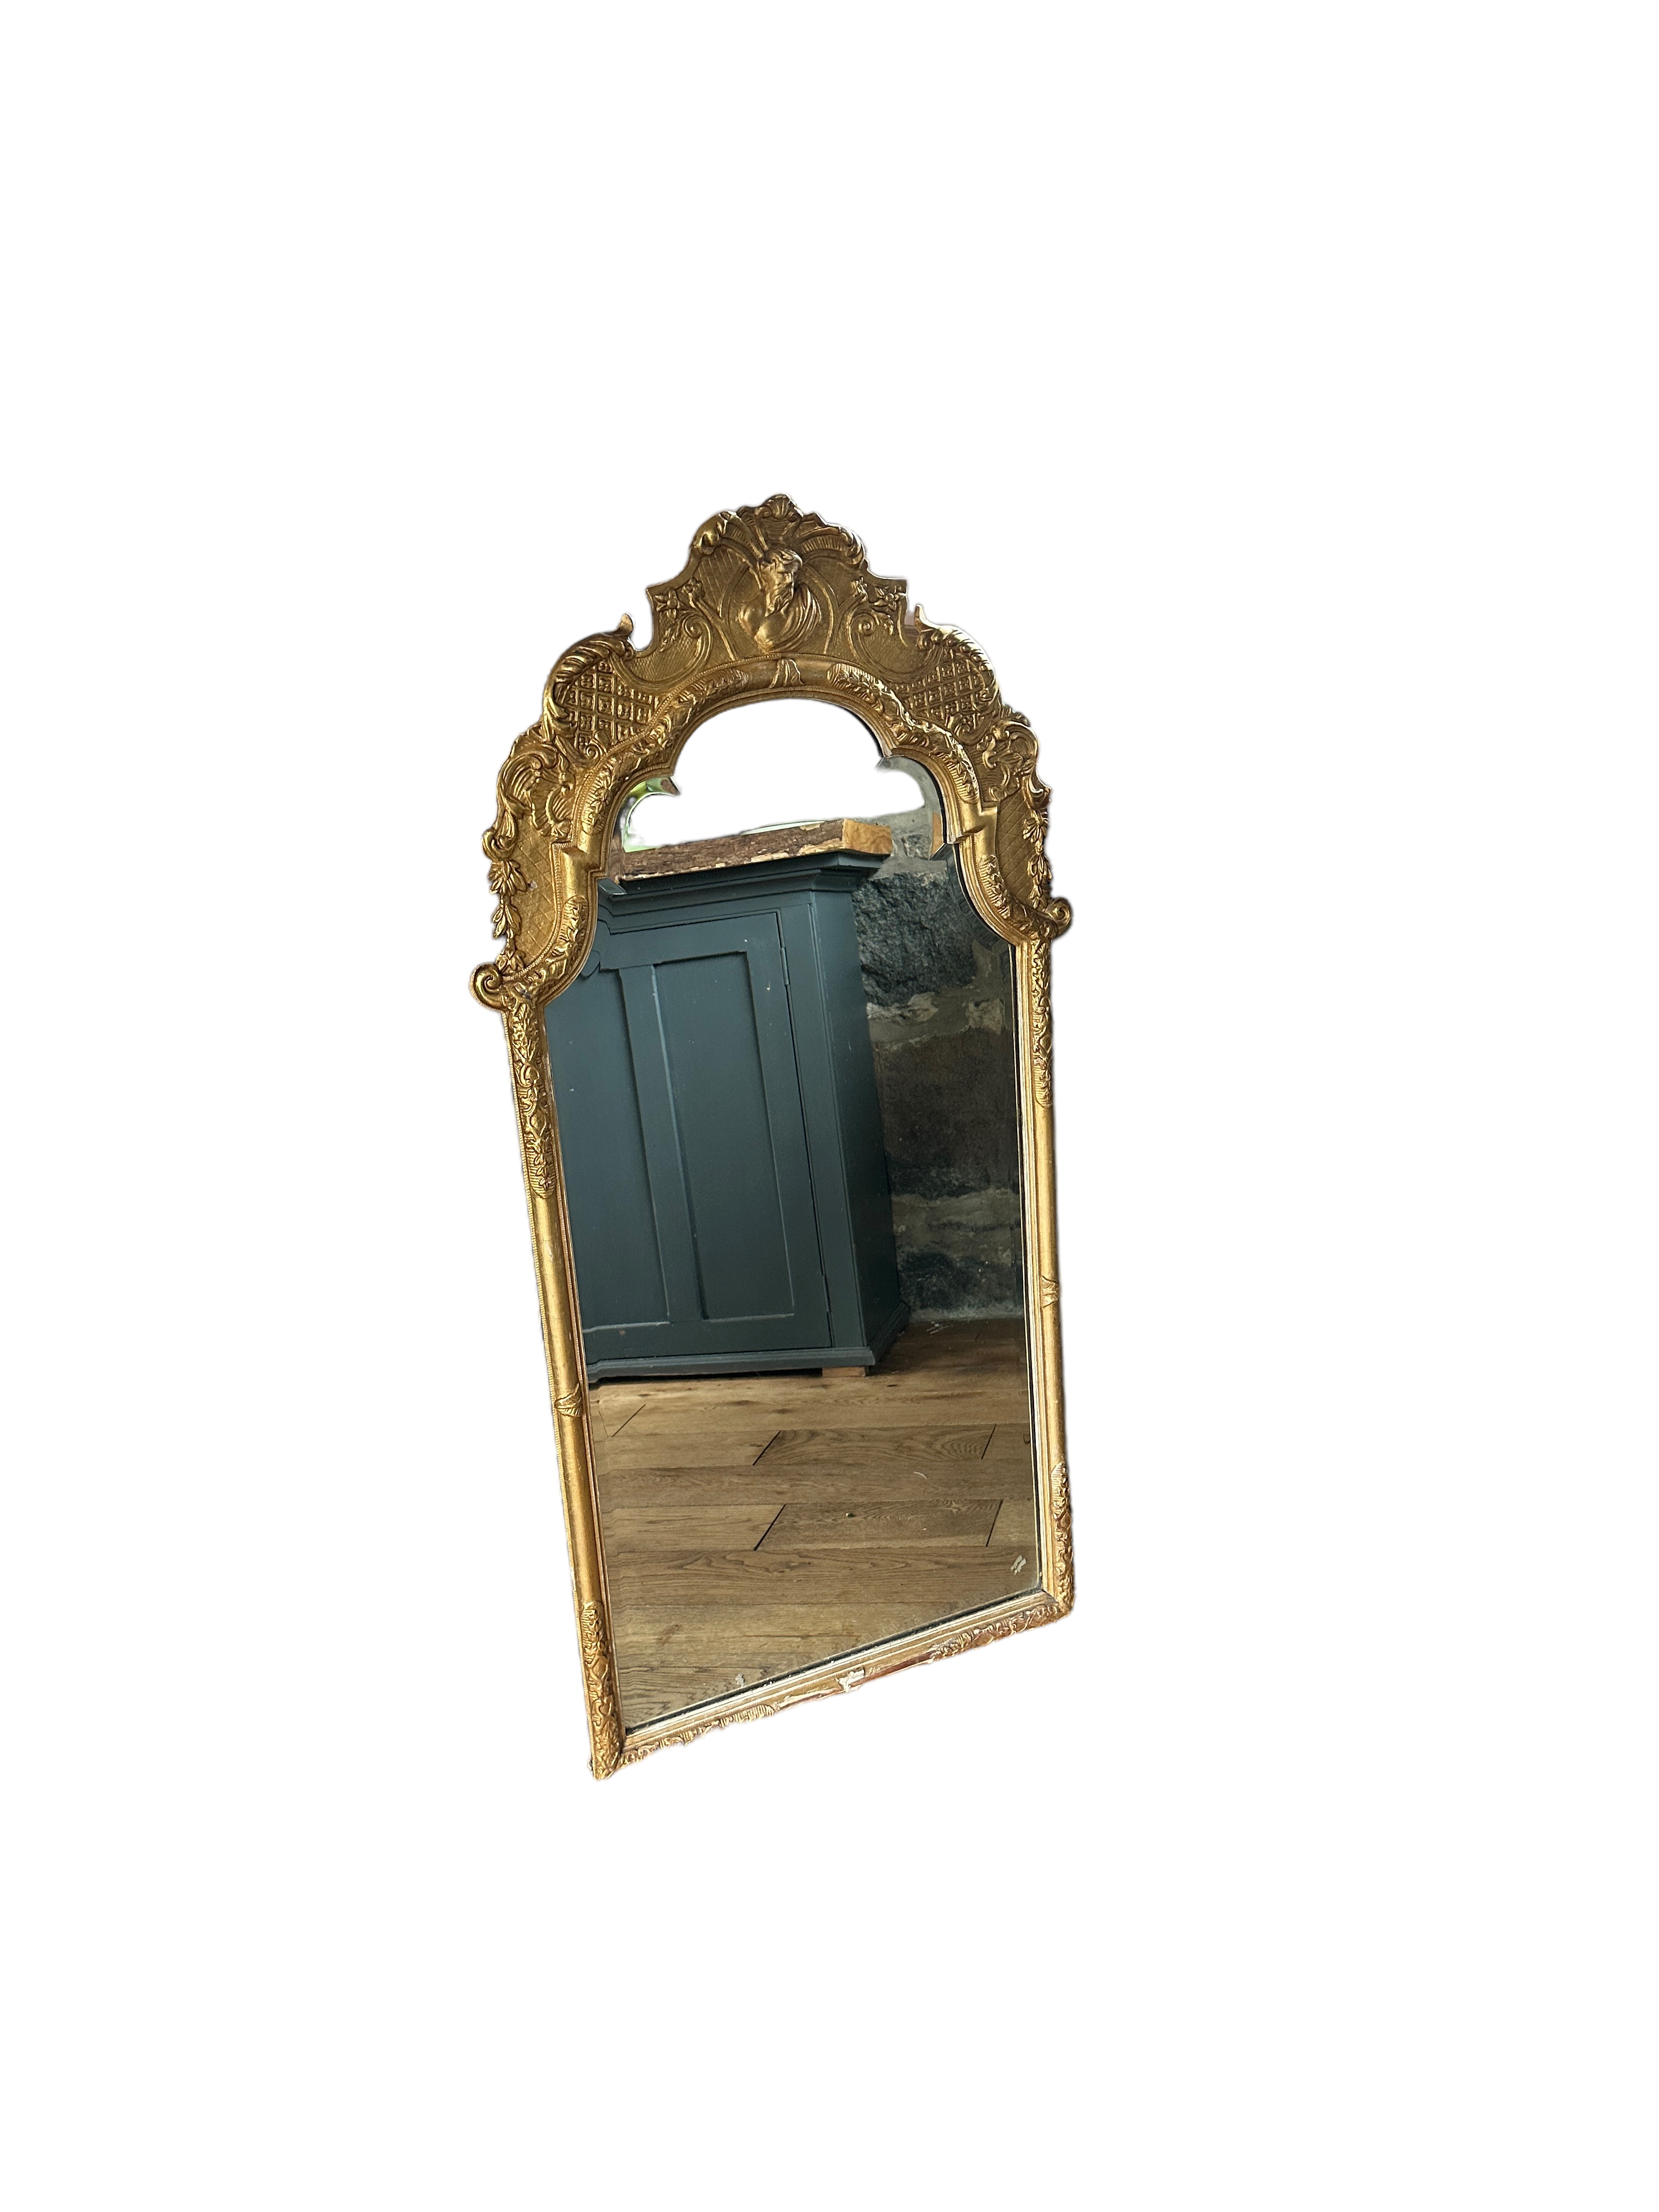 Vintage Wood and Gold Coloured Mirror 46" x 22". - Image 5 of 8